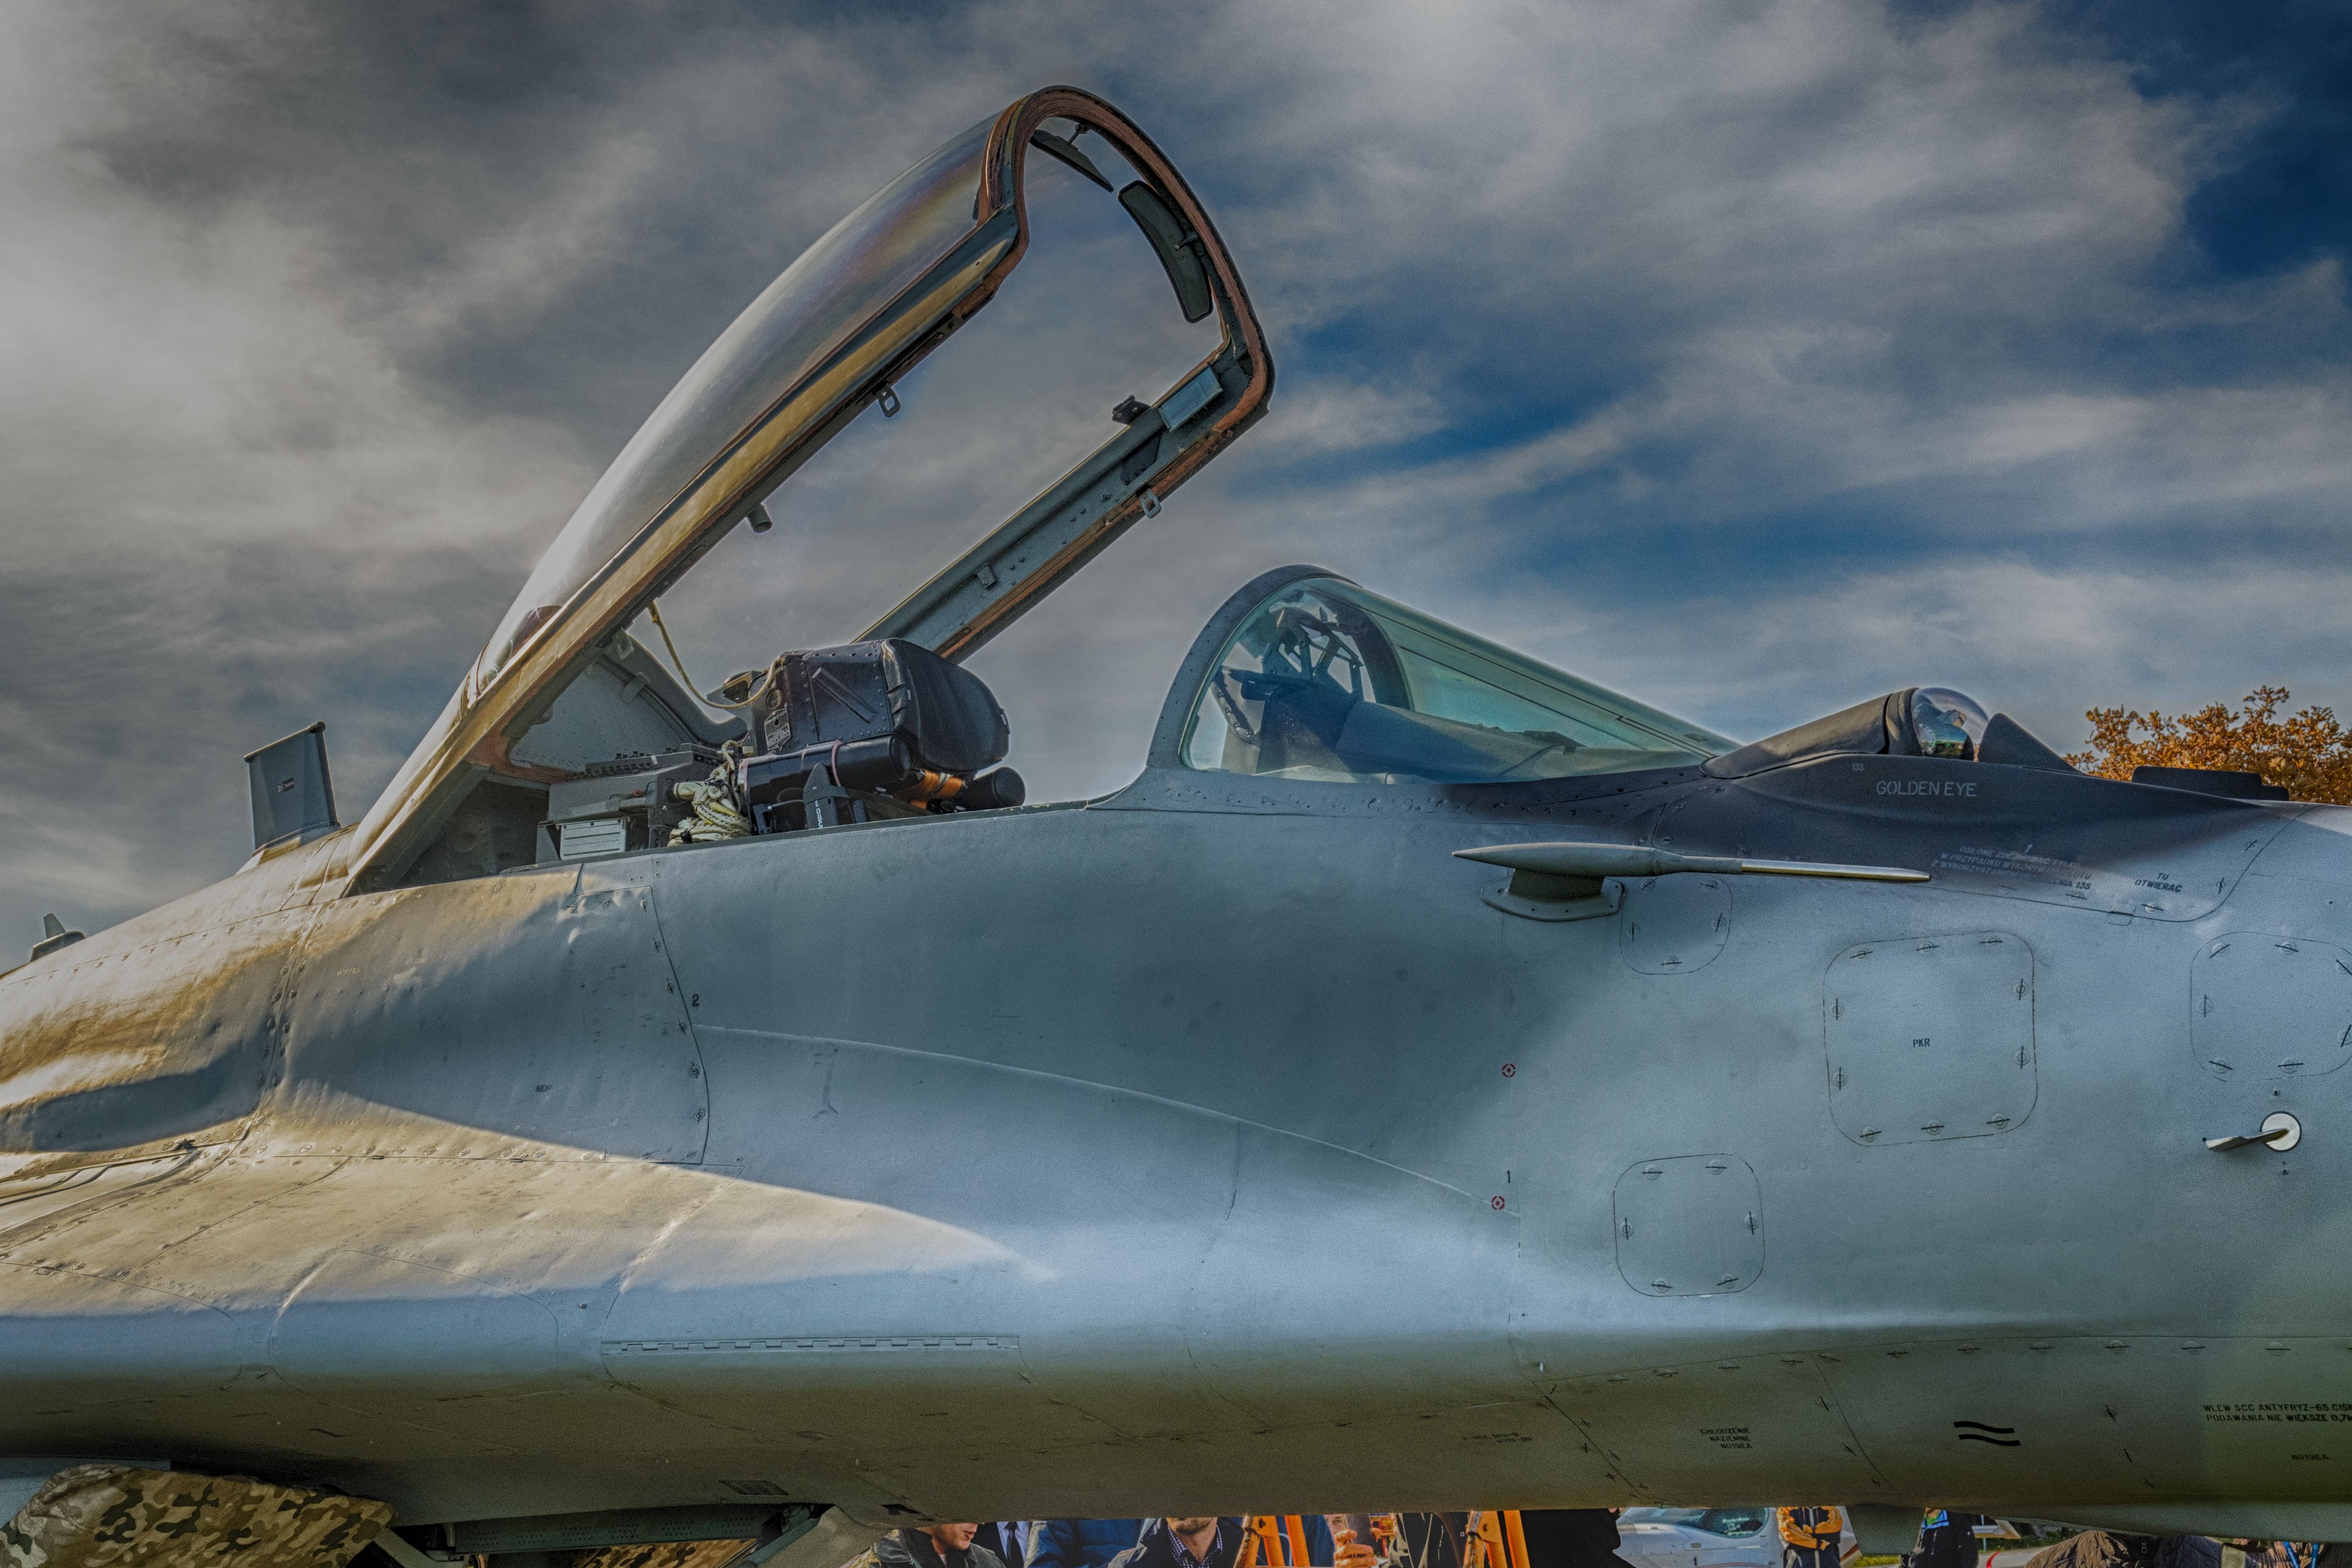 A Mig-29 with its cockpit open.